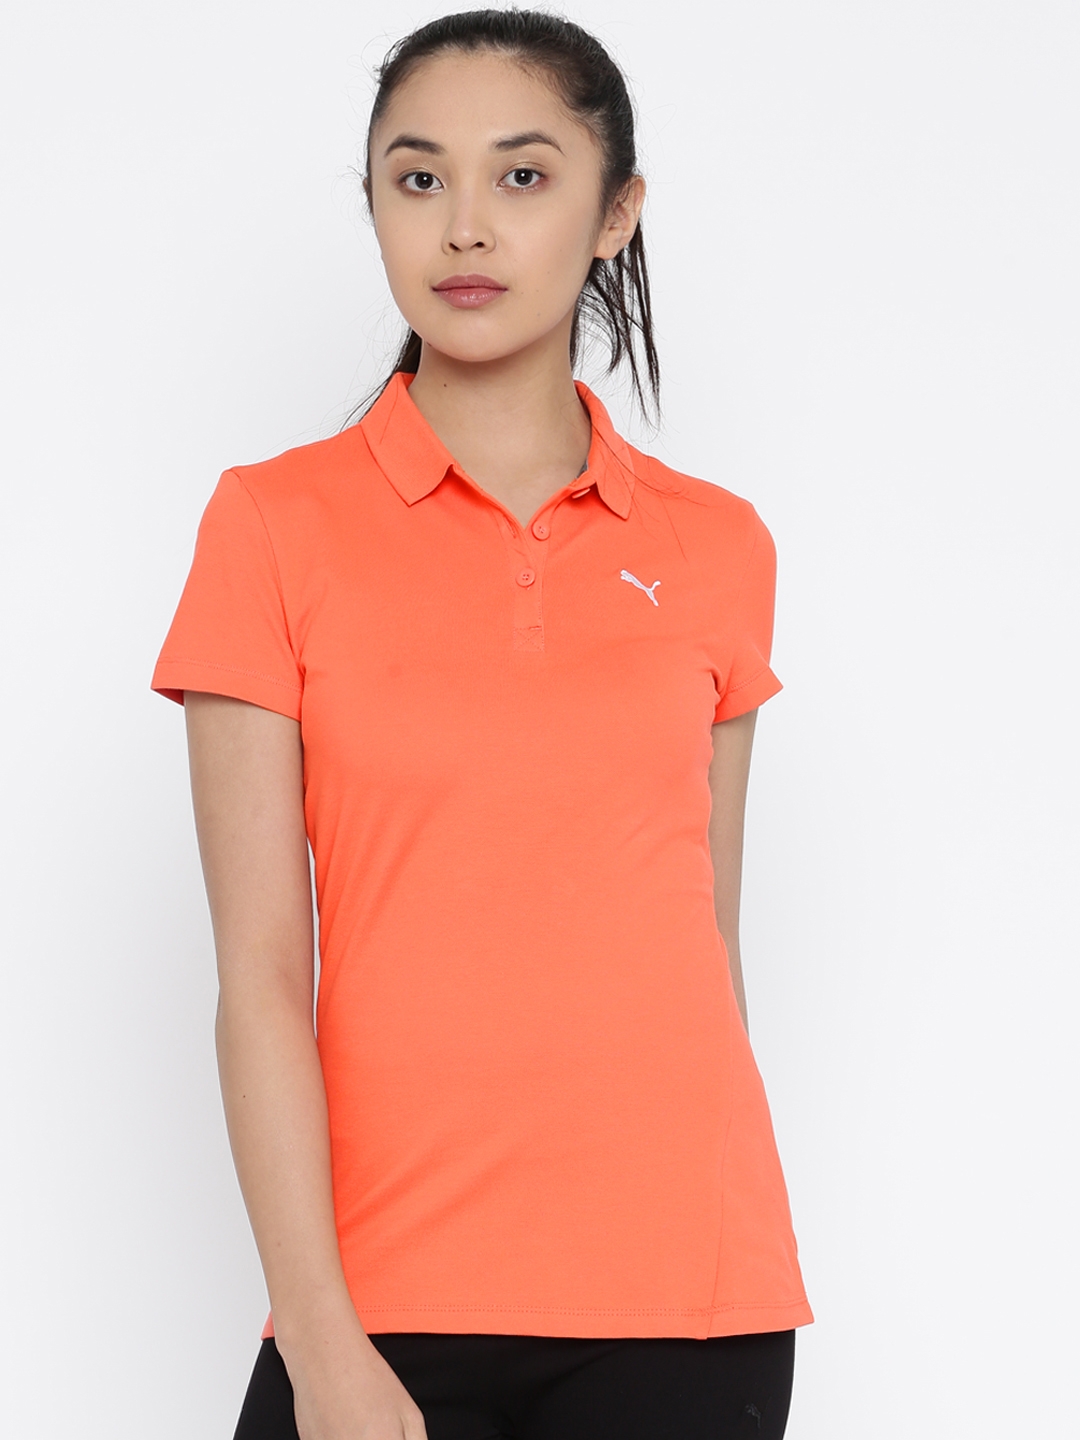 Wine Clementine Womens Whisper Pique Polo Tee S 